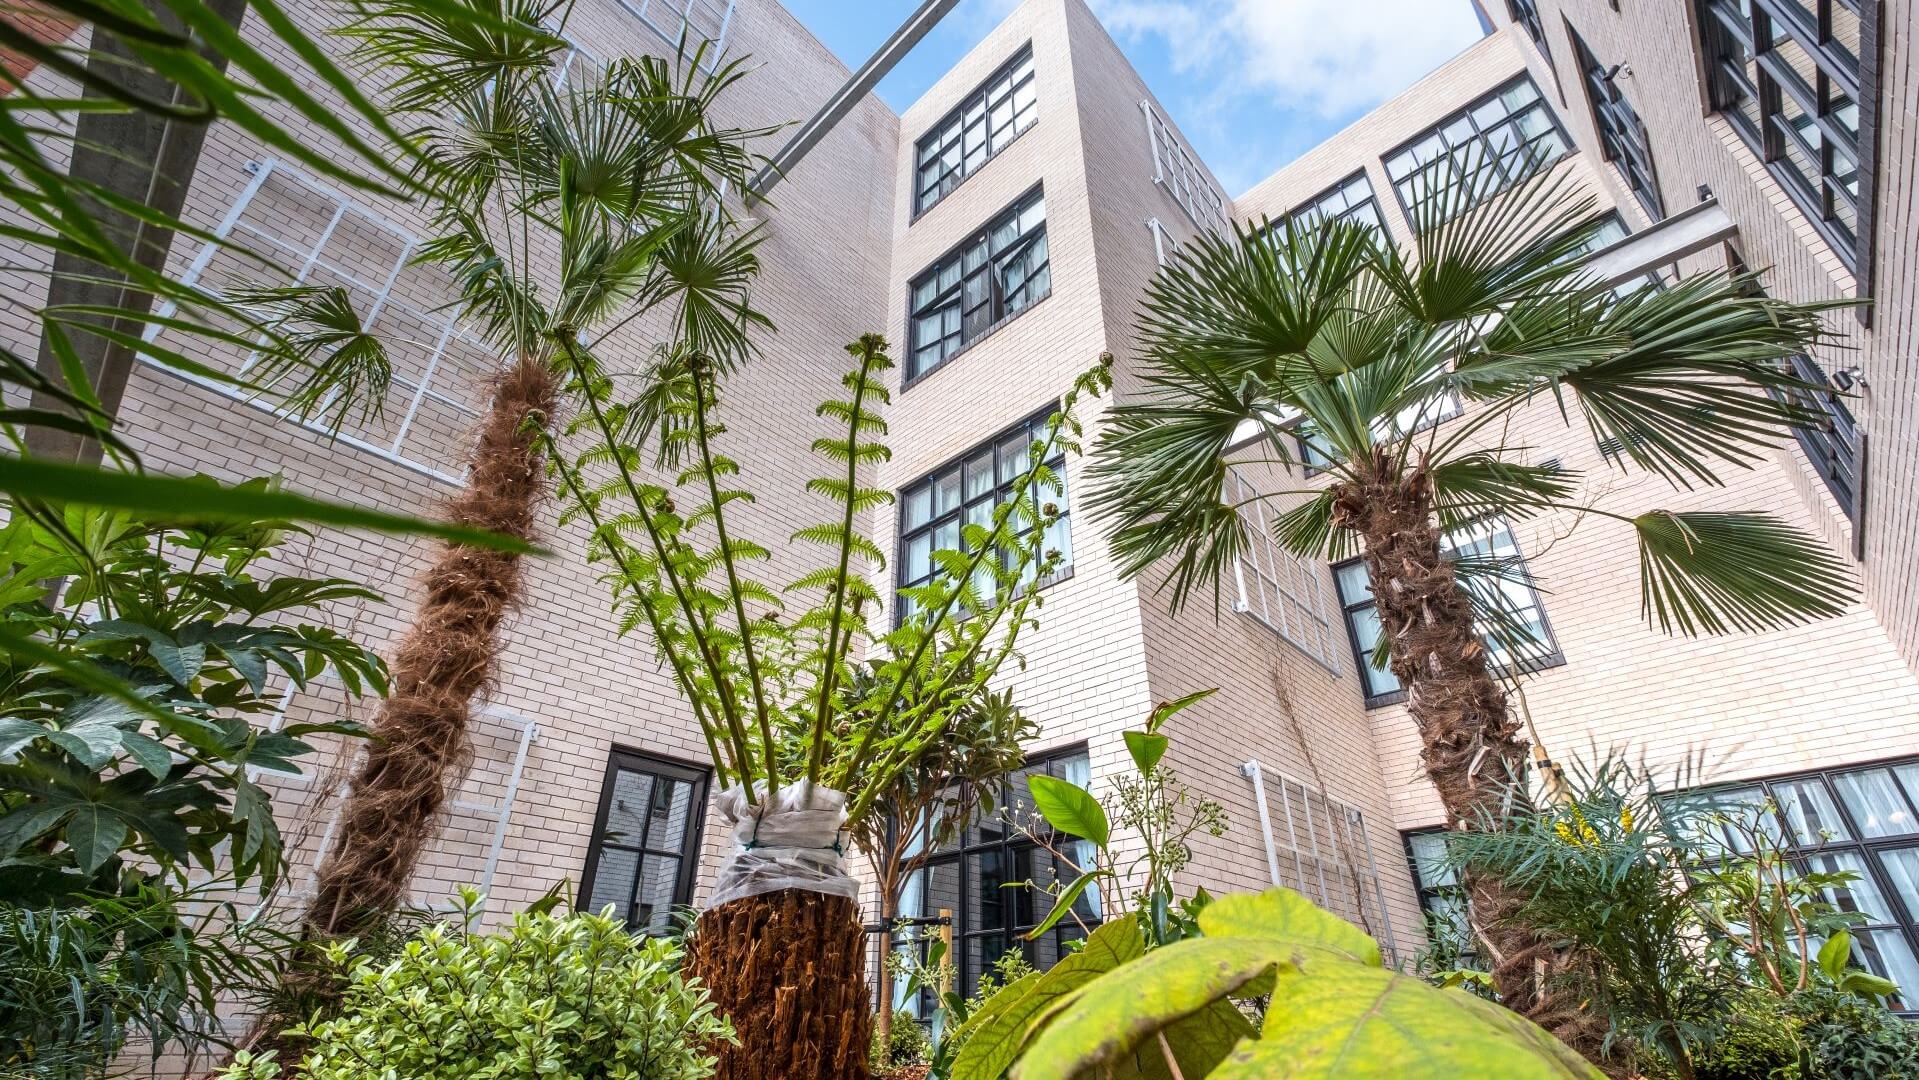 photo of hotel courtyard looking up at buildings through palm trees and plants